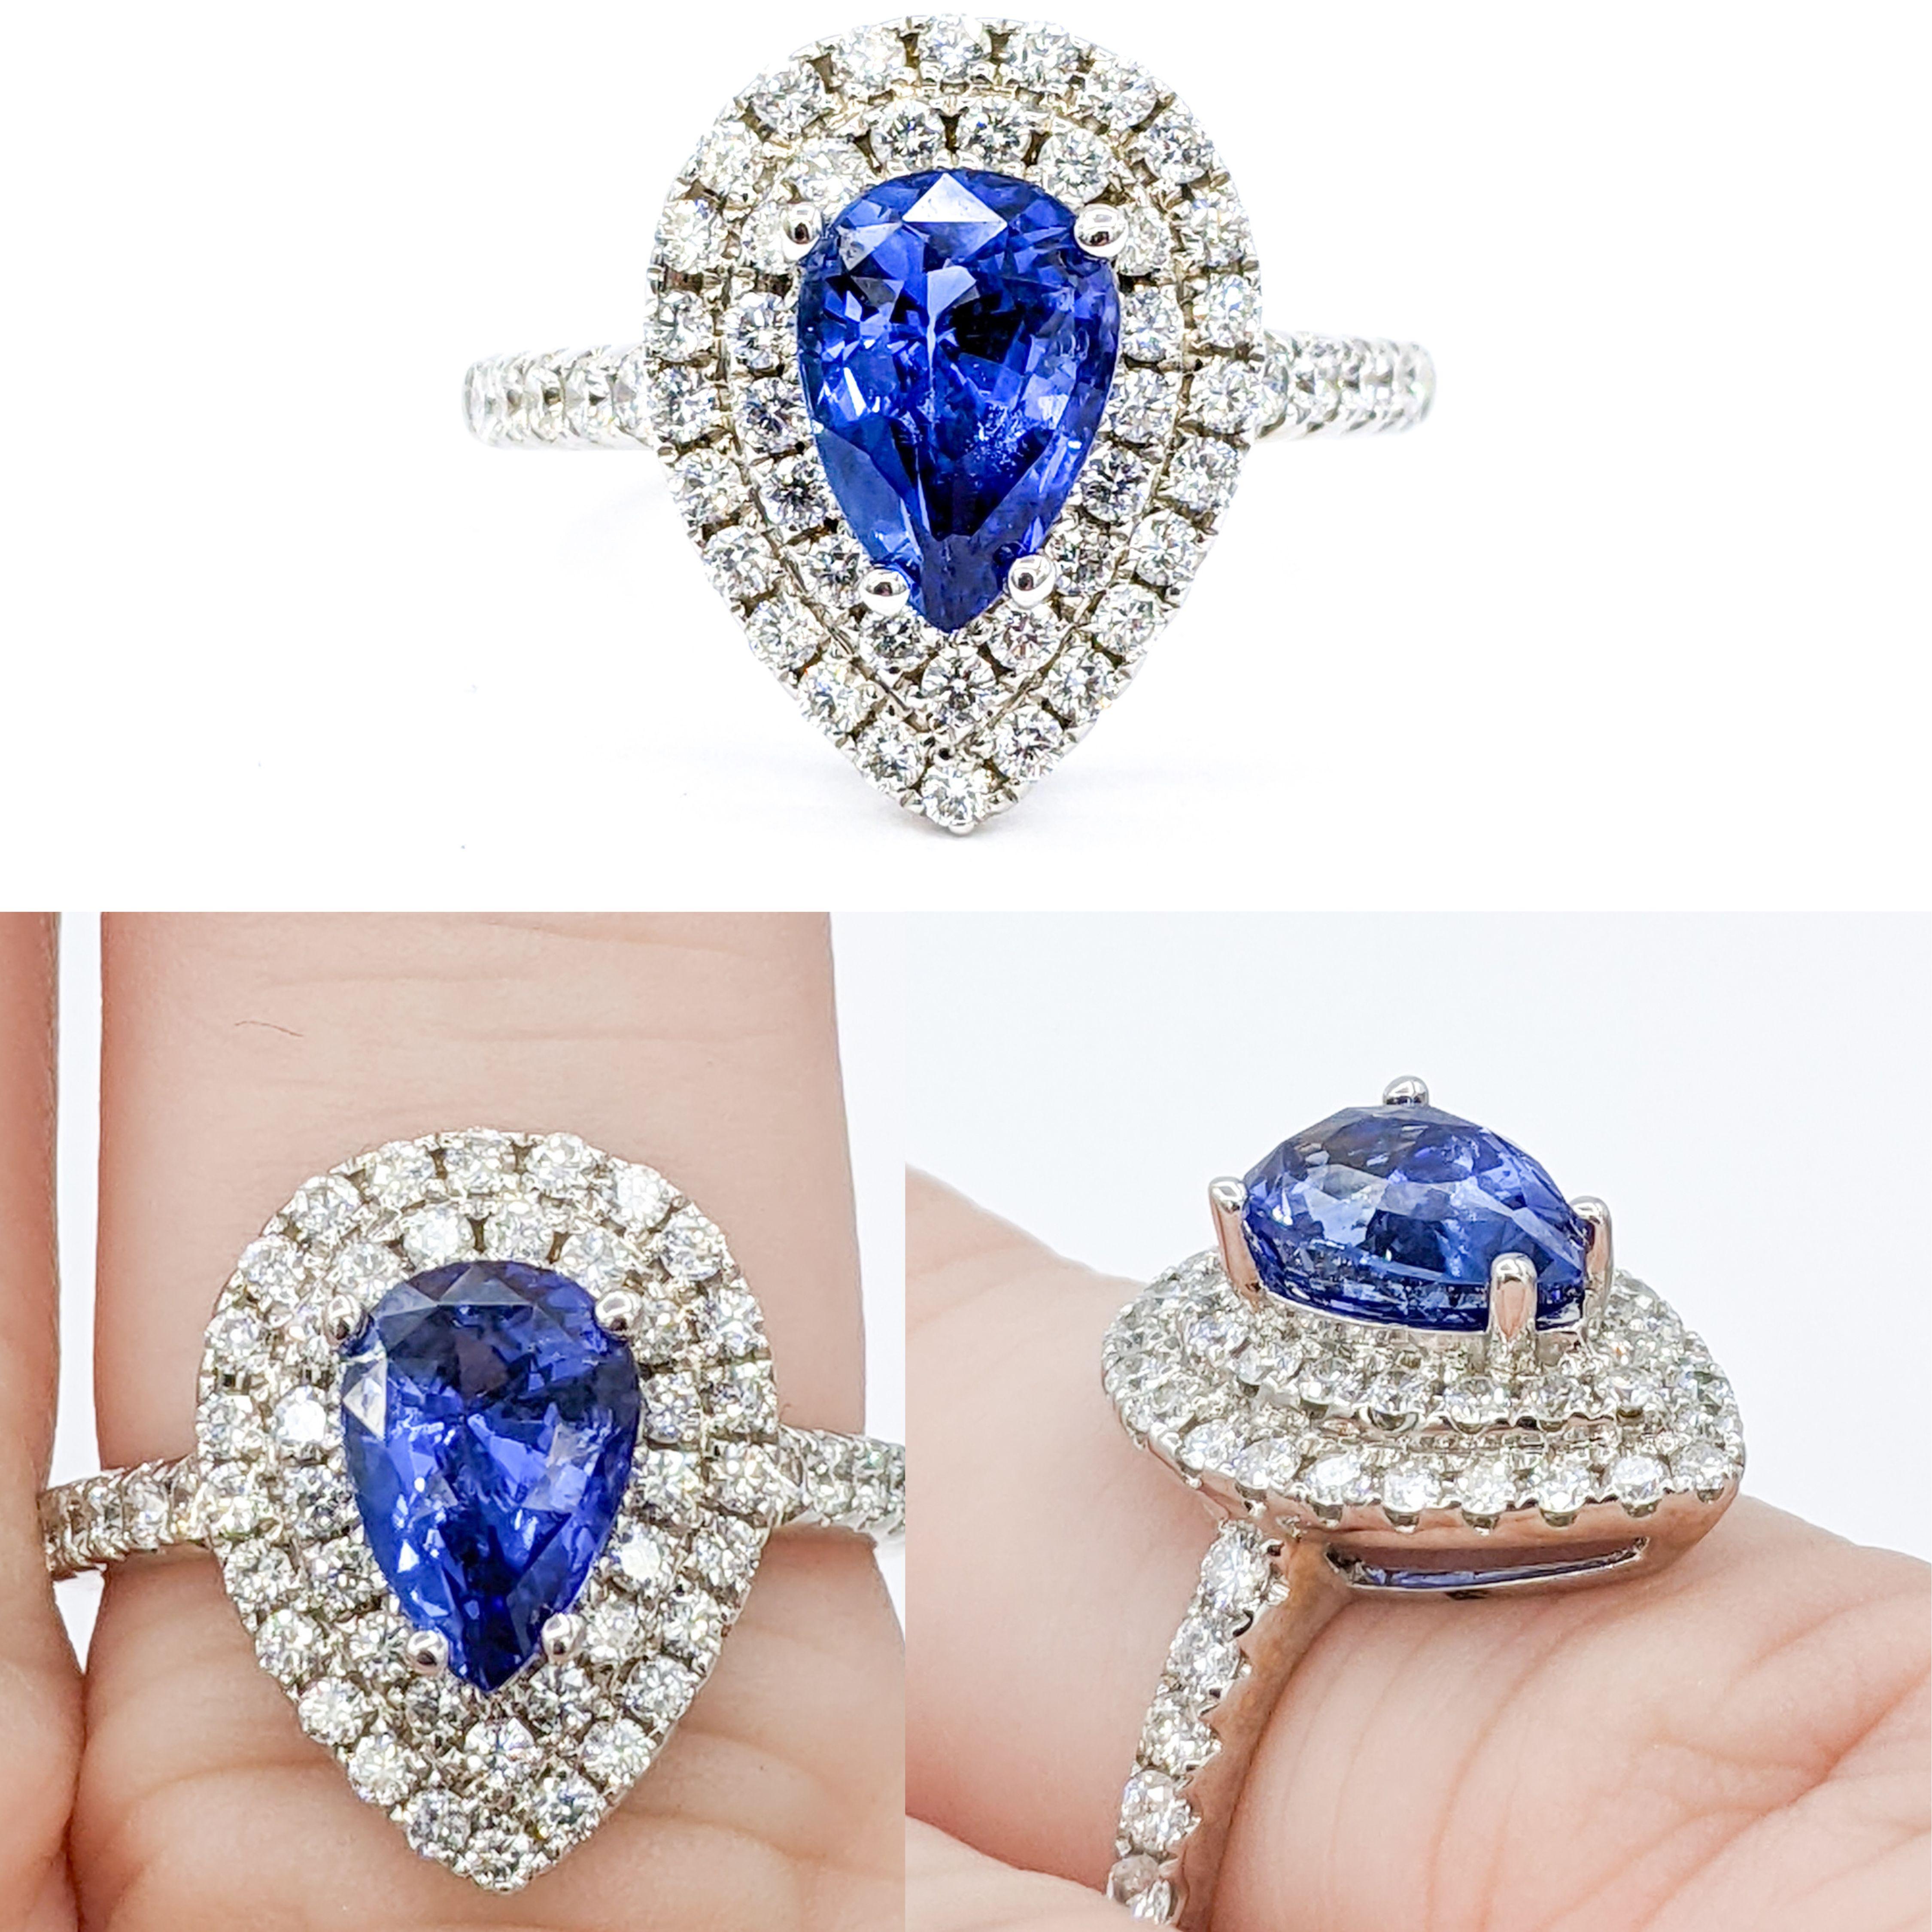 Elevate your elegance with our Stunning Sapphire & Diamond Cocktail Ring, an embodiment of sophistication and timeless luxury.

At the centerpiece of this majestic ring is a 2.00ct pear-cut sapphire, a stone renowned for its deep, enchanting hues